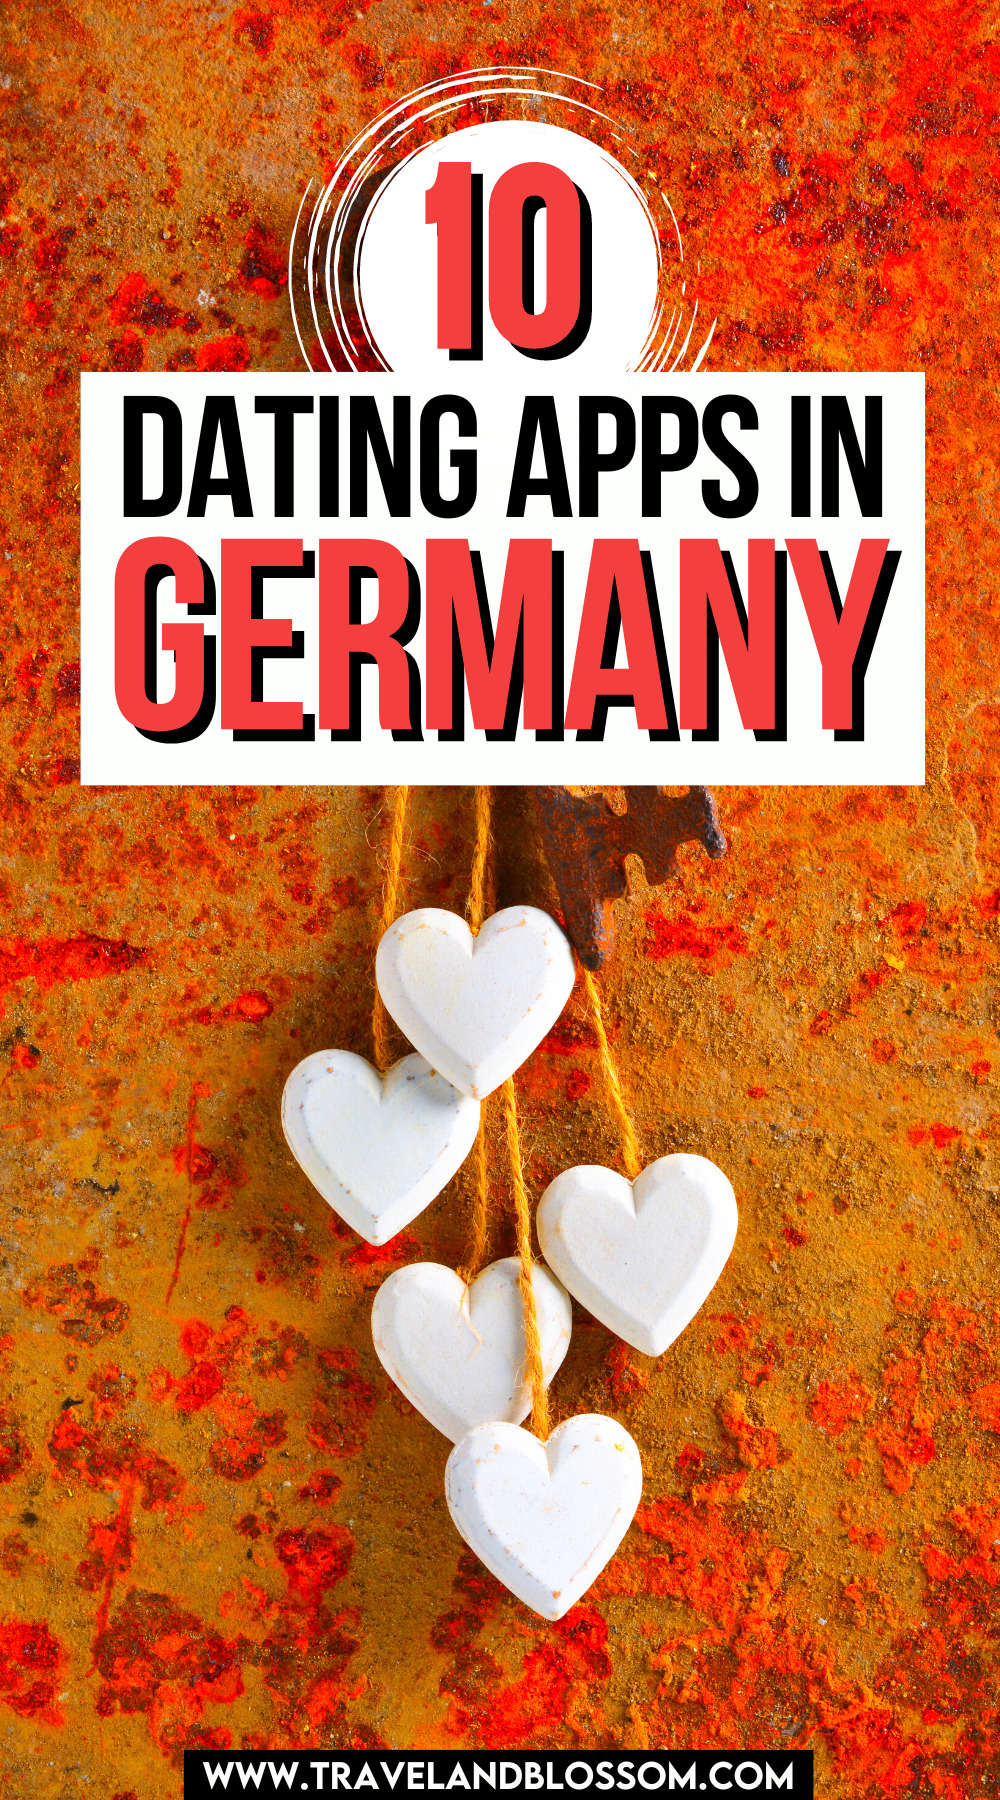 The 10 Best Dating Apps in Germany for Au Pairs